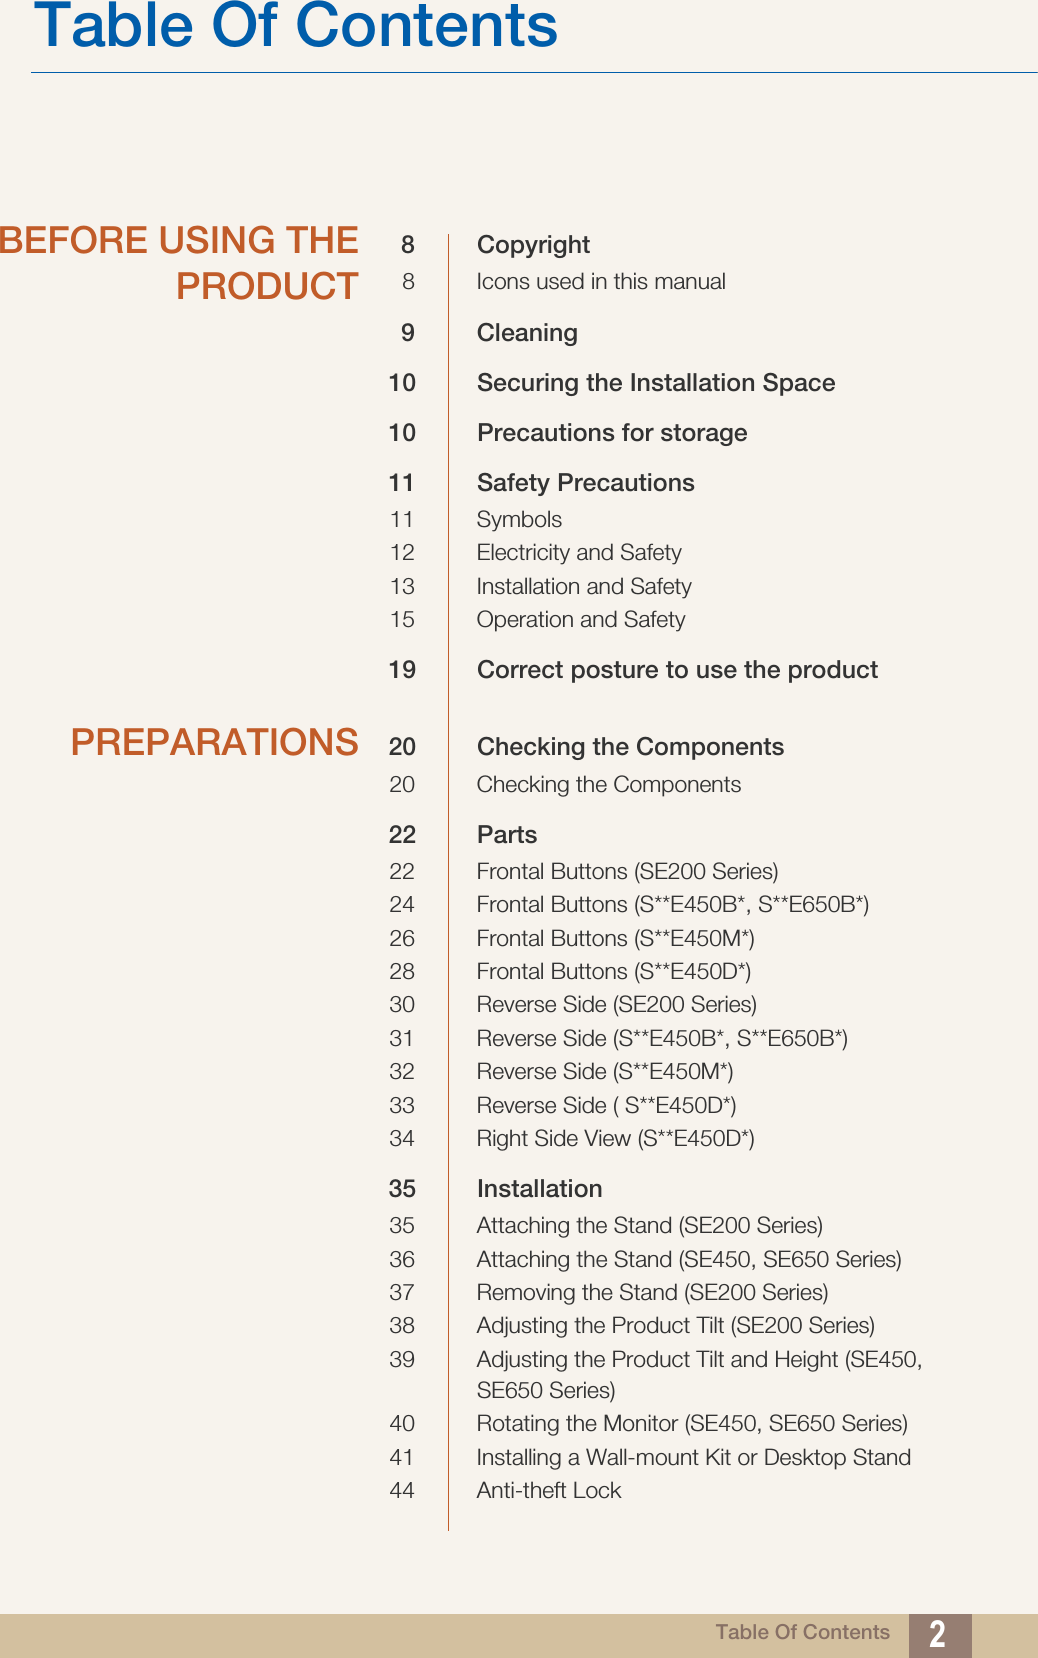 Table Of Contents 2Table Of ContentsBEFORE USING THEPRODUCT8 Copyright8 Icons used in this manual9 Cleaning10 Securing the Installation Space10 Precautions for storage11 Safety Precautions11 Symbols12 Electricity and Safety13 Installation and Safety 15 Operation and Safety19 Correct posture to use the product PREPARATIONS 20 Checking the Components20 Checking the Components22 Parts22 Frontal Buttons (SE200 Series)24 Frontal Buttons (S**E450B*, S**E650B*)26 Frontal Buttons (S**E450M*)28 Frontal Buttons (S**E450D*)30 Reverse Side (SE200 Series)31 Reverse Side (S**E450B*, S**E650B*)32 Reverse Side (S**E450M*)33 Reverse Side ( S**E450D*)34 Right Side View (S**E450D*)35 Installation35 Attaching the Stand (SE200 Series)36 Attaching the Stand (SE450, SE650 Series)37 Removing the Stand (SE200 Series)38 Adjusting the Product Tilt (SE200 Series)39 Adjusting the Product Tilt and Height (SE450, SE650 Series)40 Rotating the Monitor (SE450, SE650 Series)41 Installing a Wall-mount Kit or Desktop Stand44 Anti-theft Lock